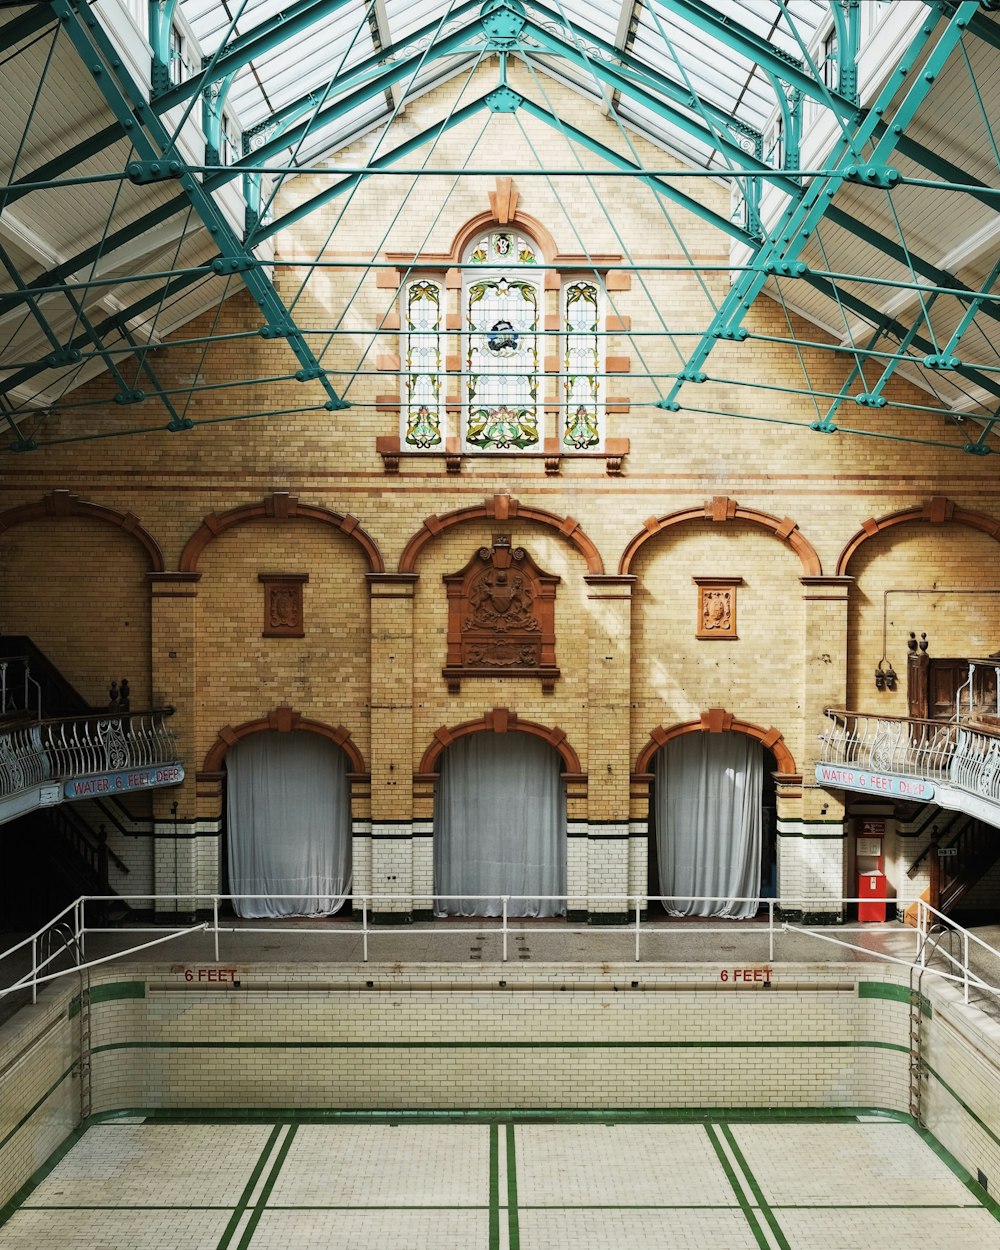 Peaky Blinders Filming Location 7: Victoria Baths, Manchester